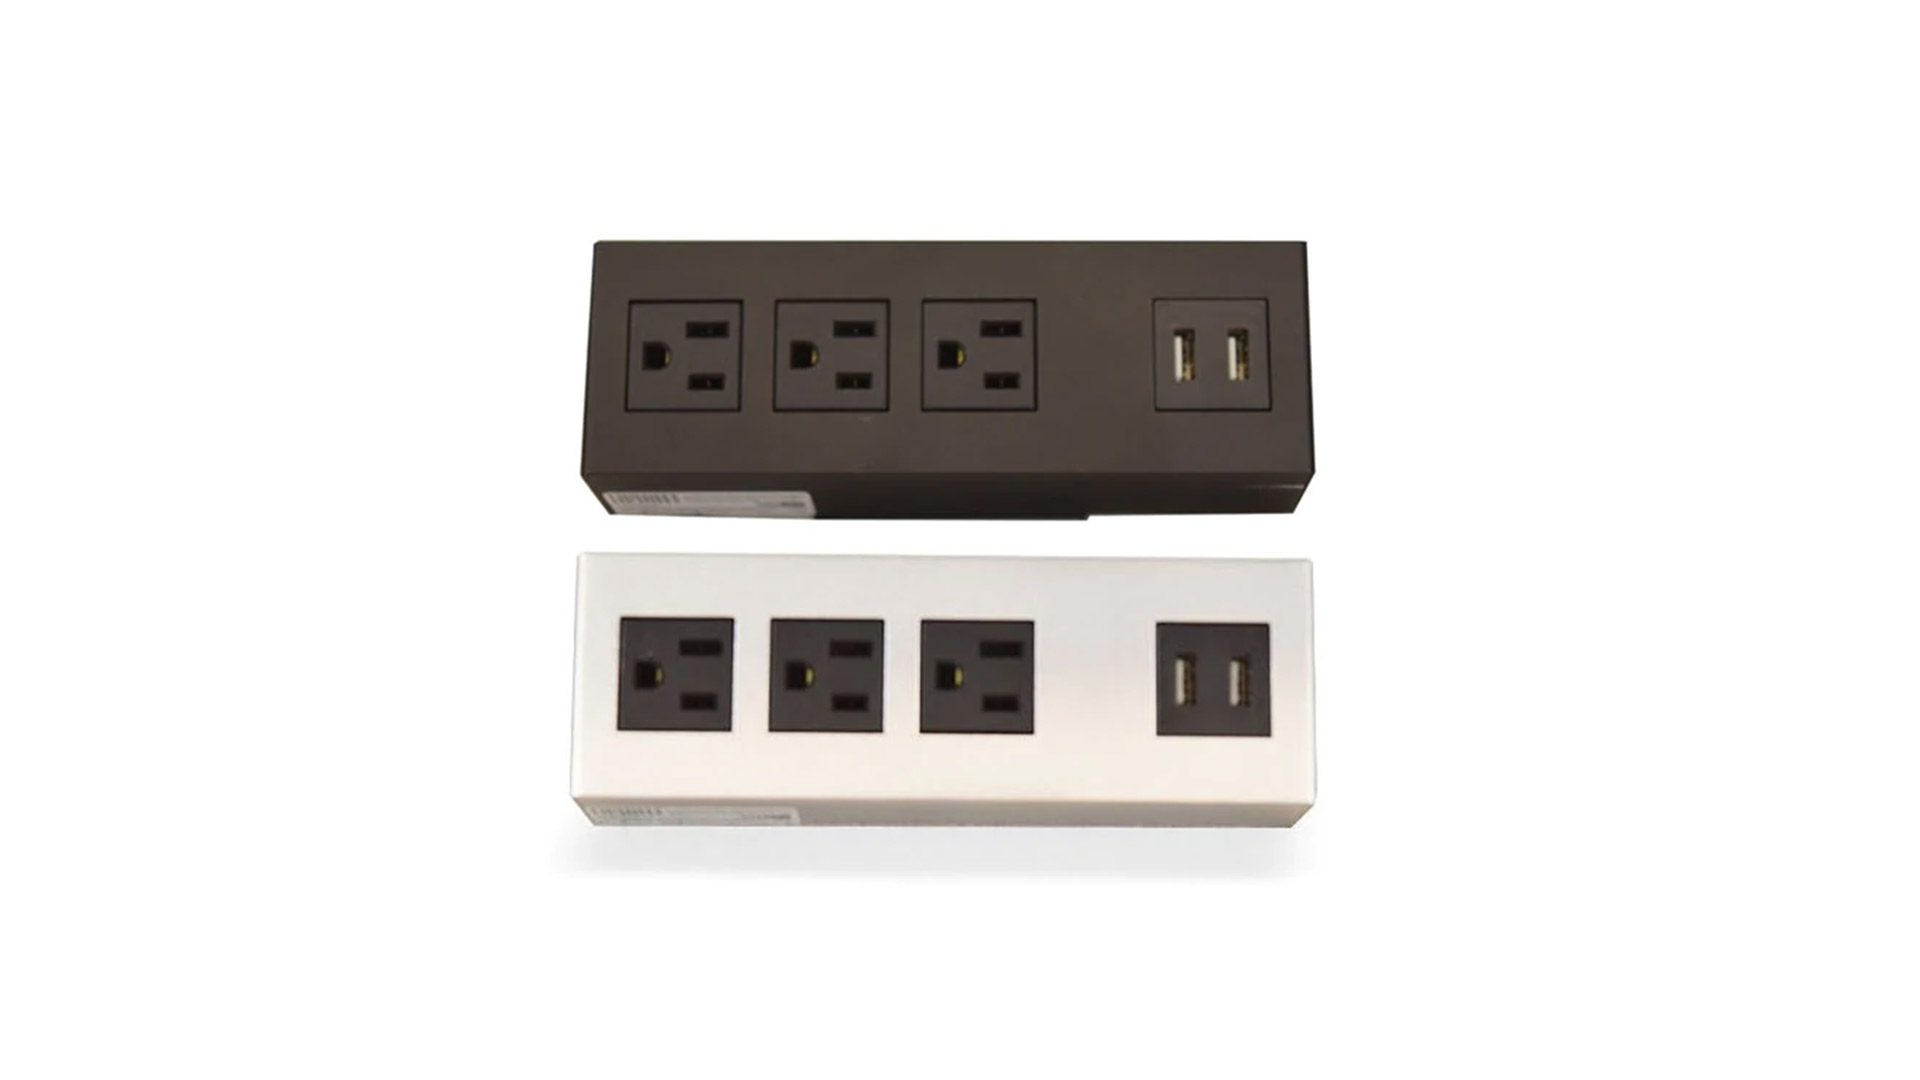 LifeDesk SmartLegs Desktop Power Outlet Box: Clamps on